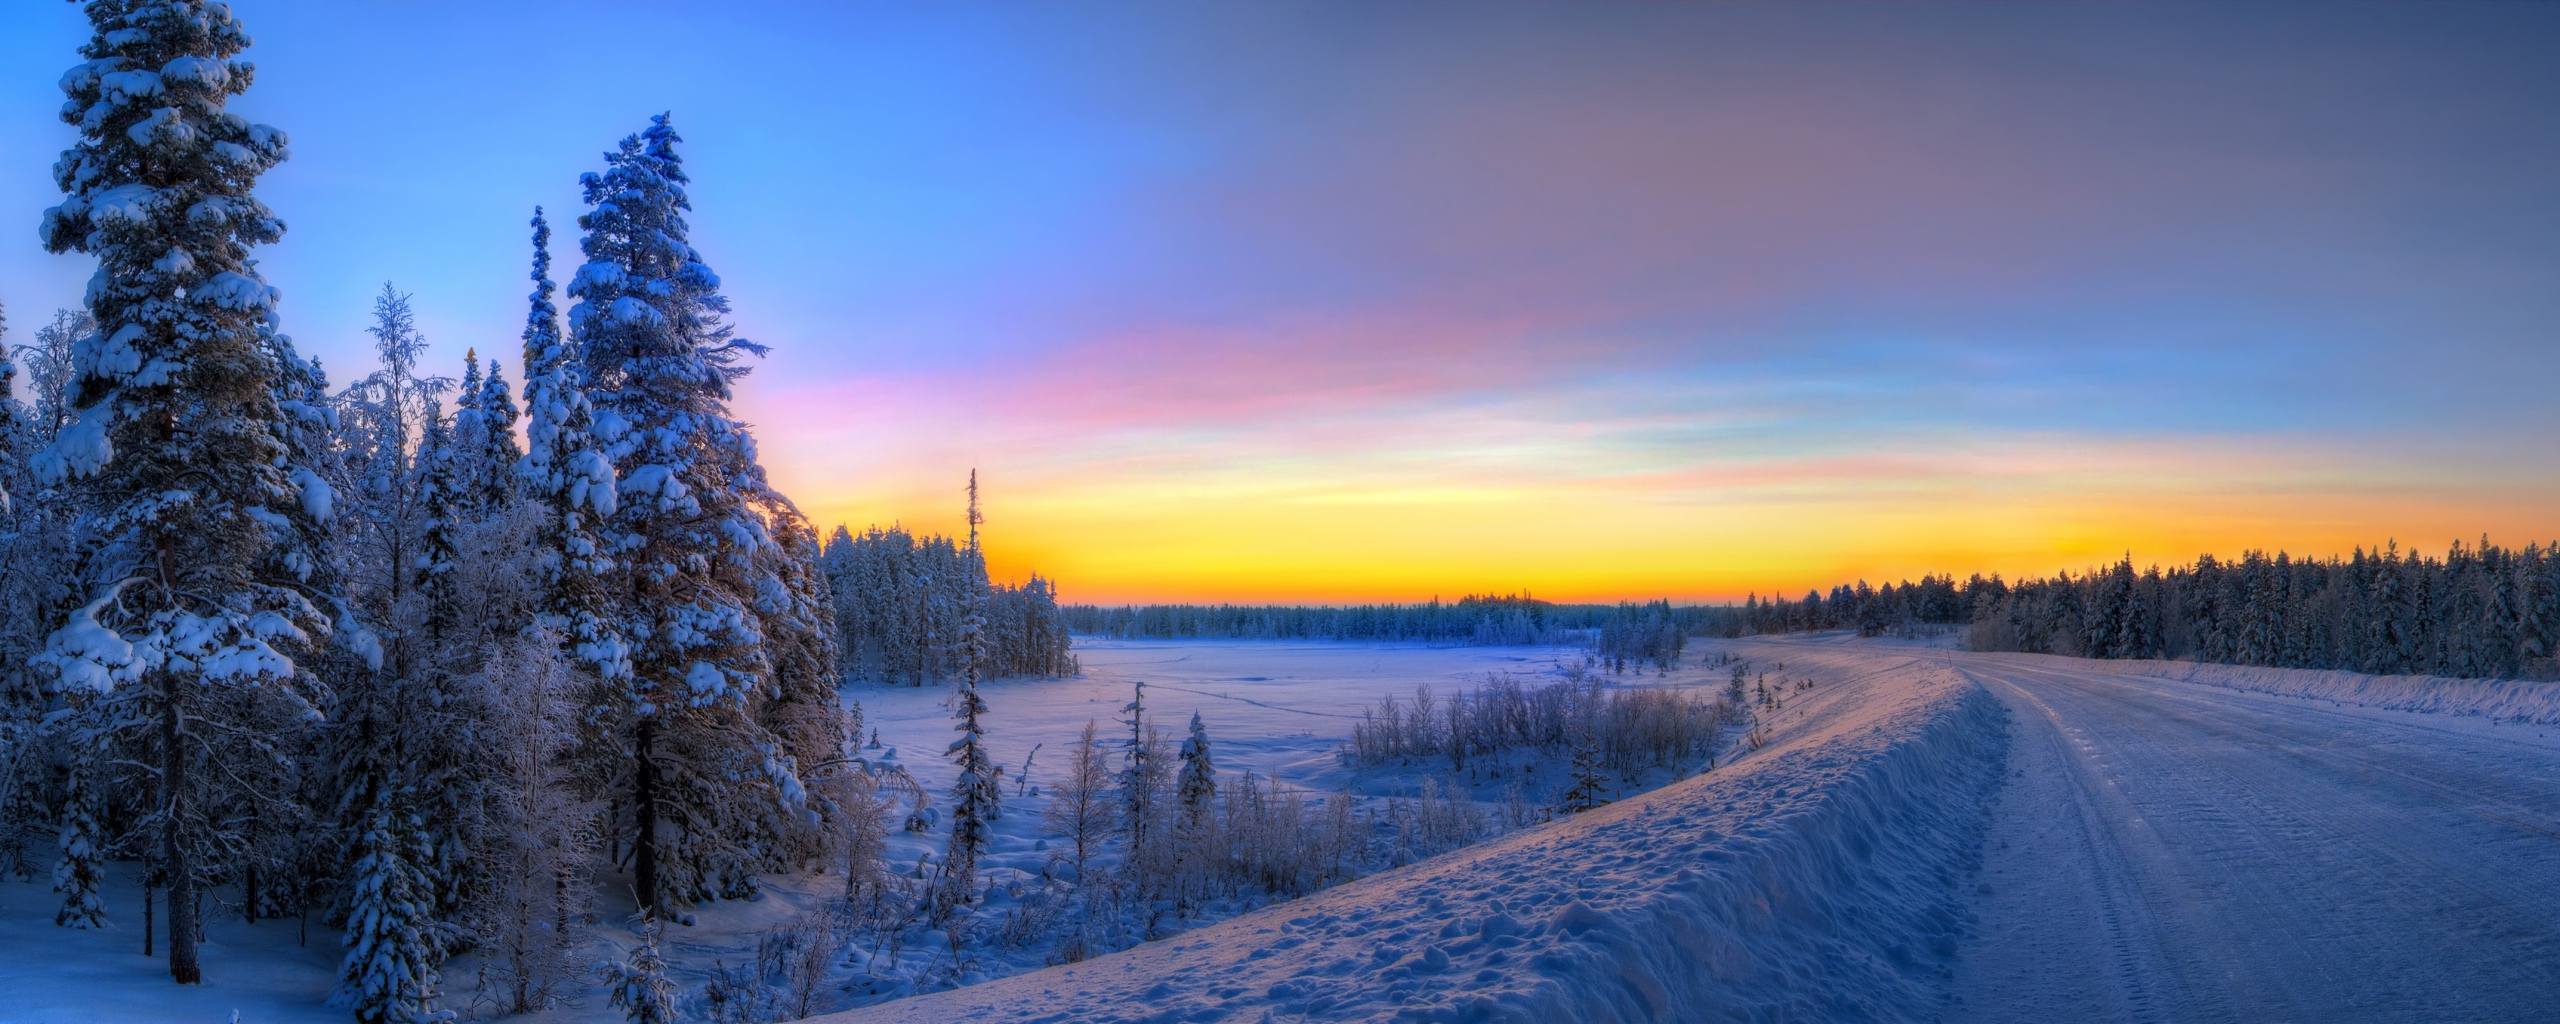 Panorama Sunset Road Winter Landscape Wallpaper Background Dual